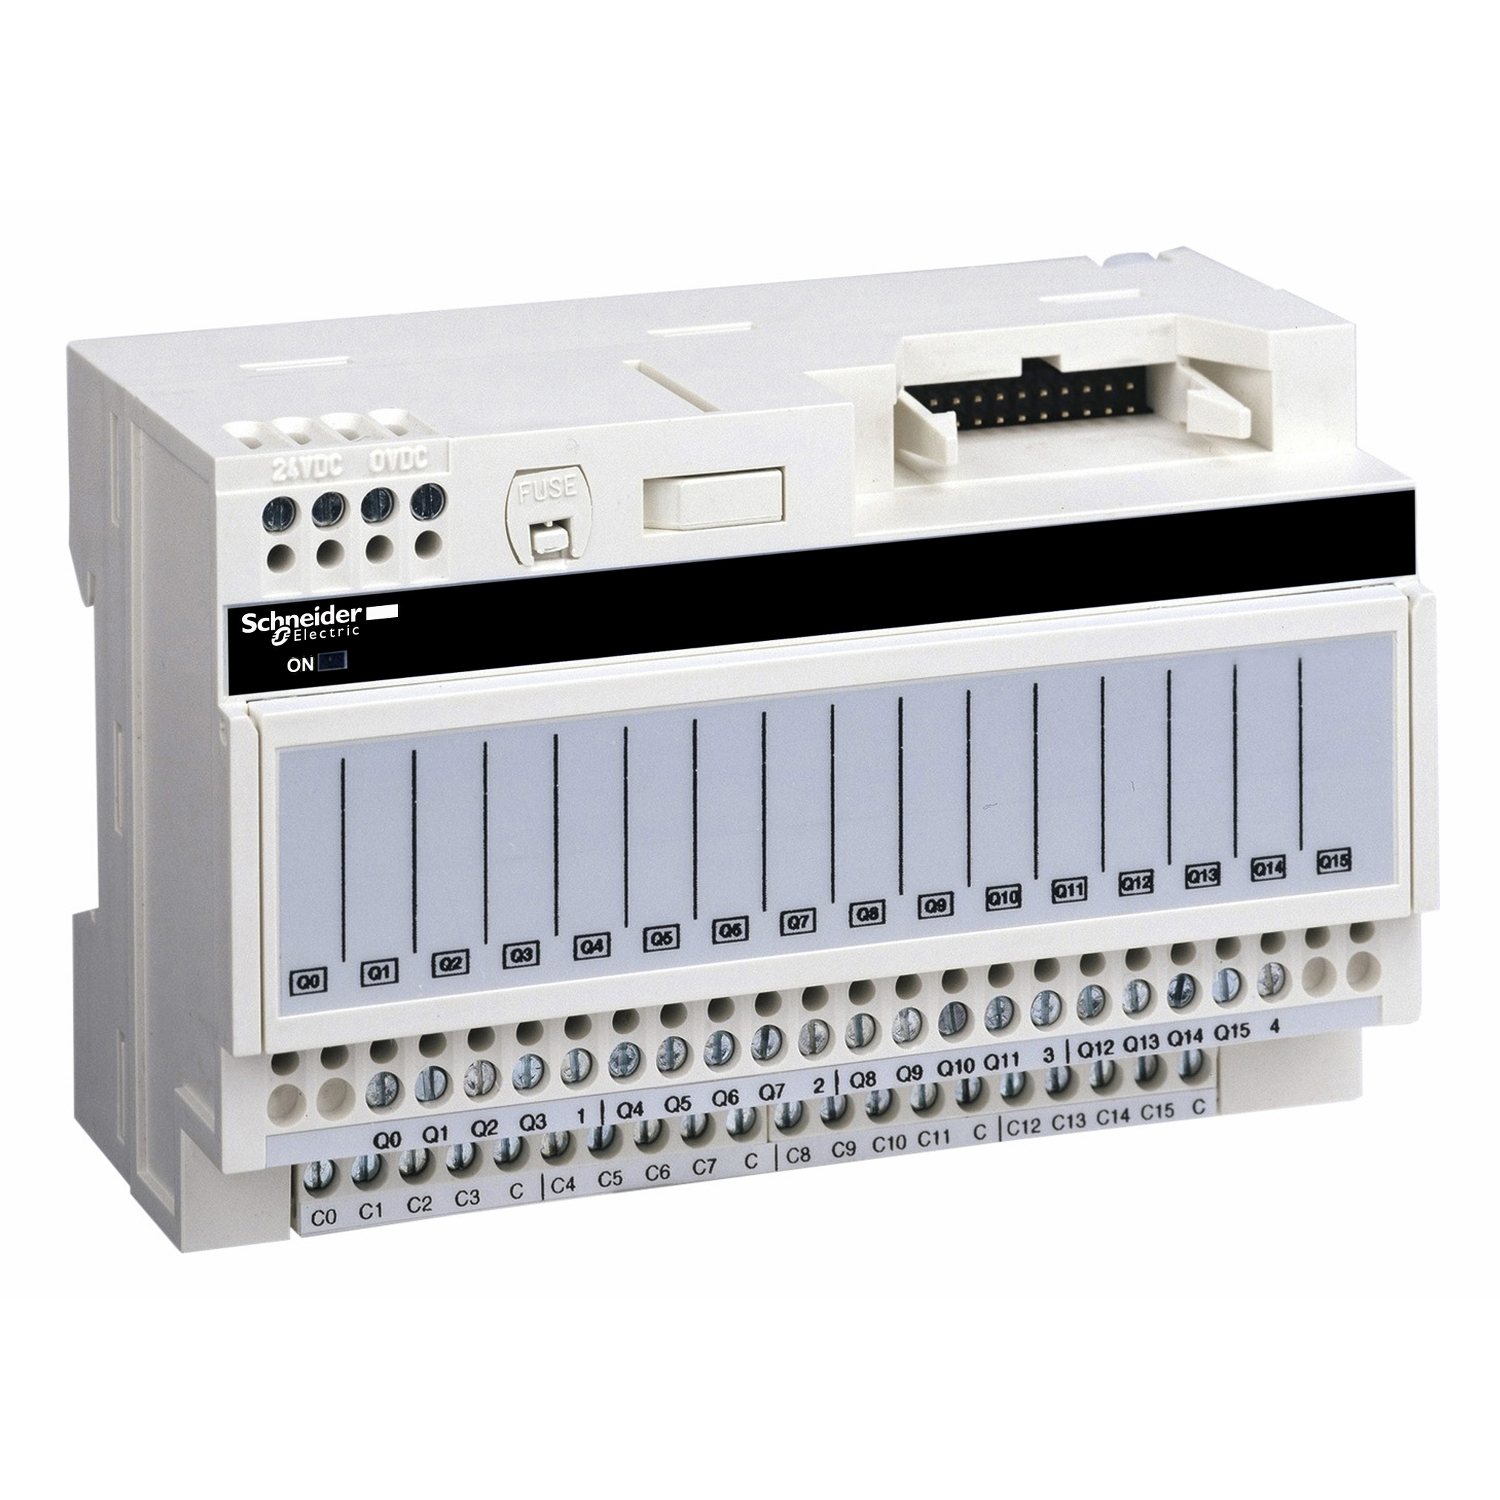 Programmable Logic Controller Distributed On Machine I/O Subsystem